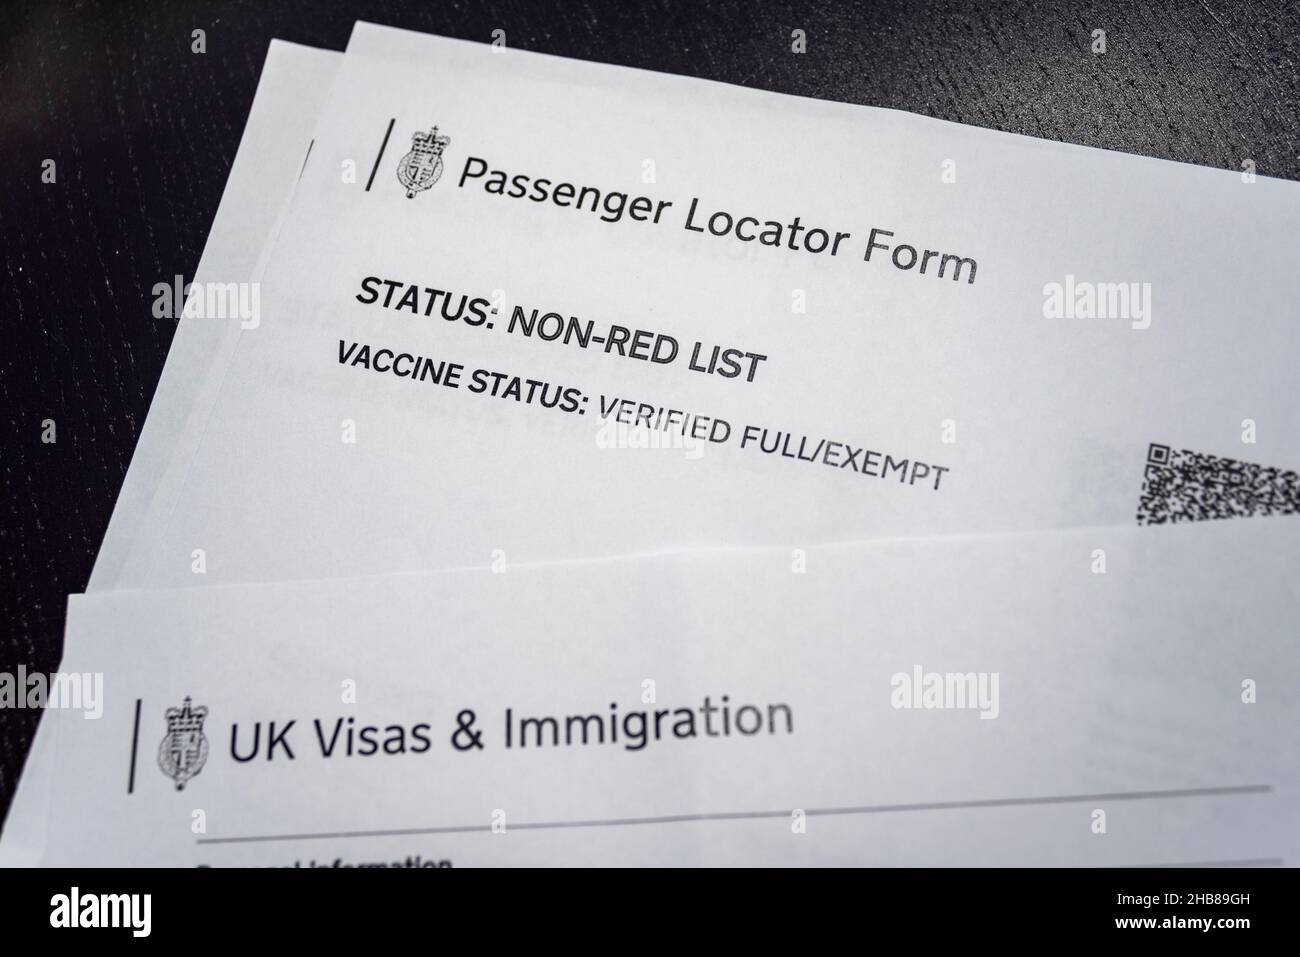 Authentic UK passenger locator form for a non-red list country Stock Photo